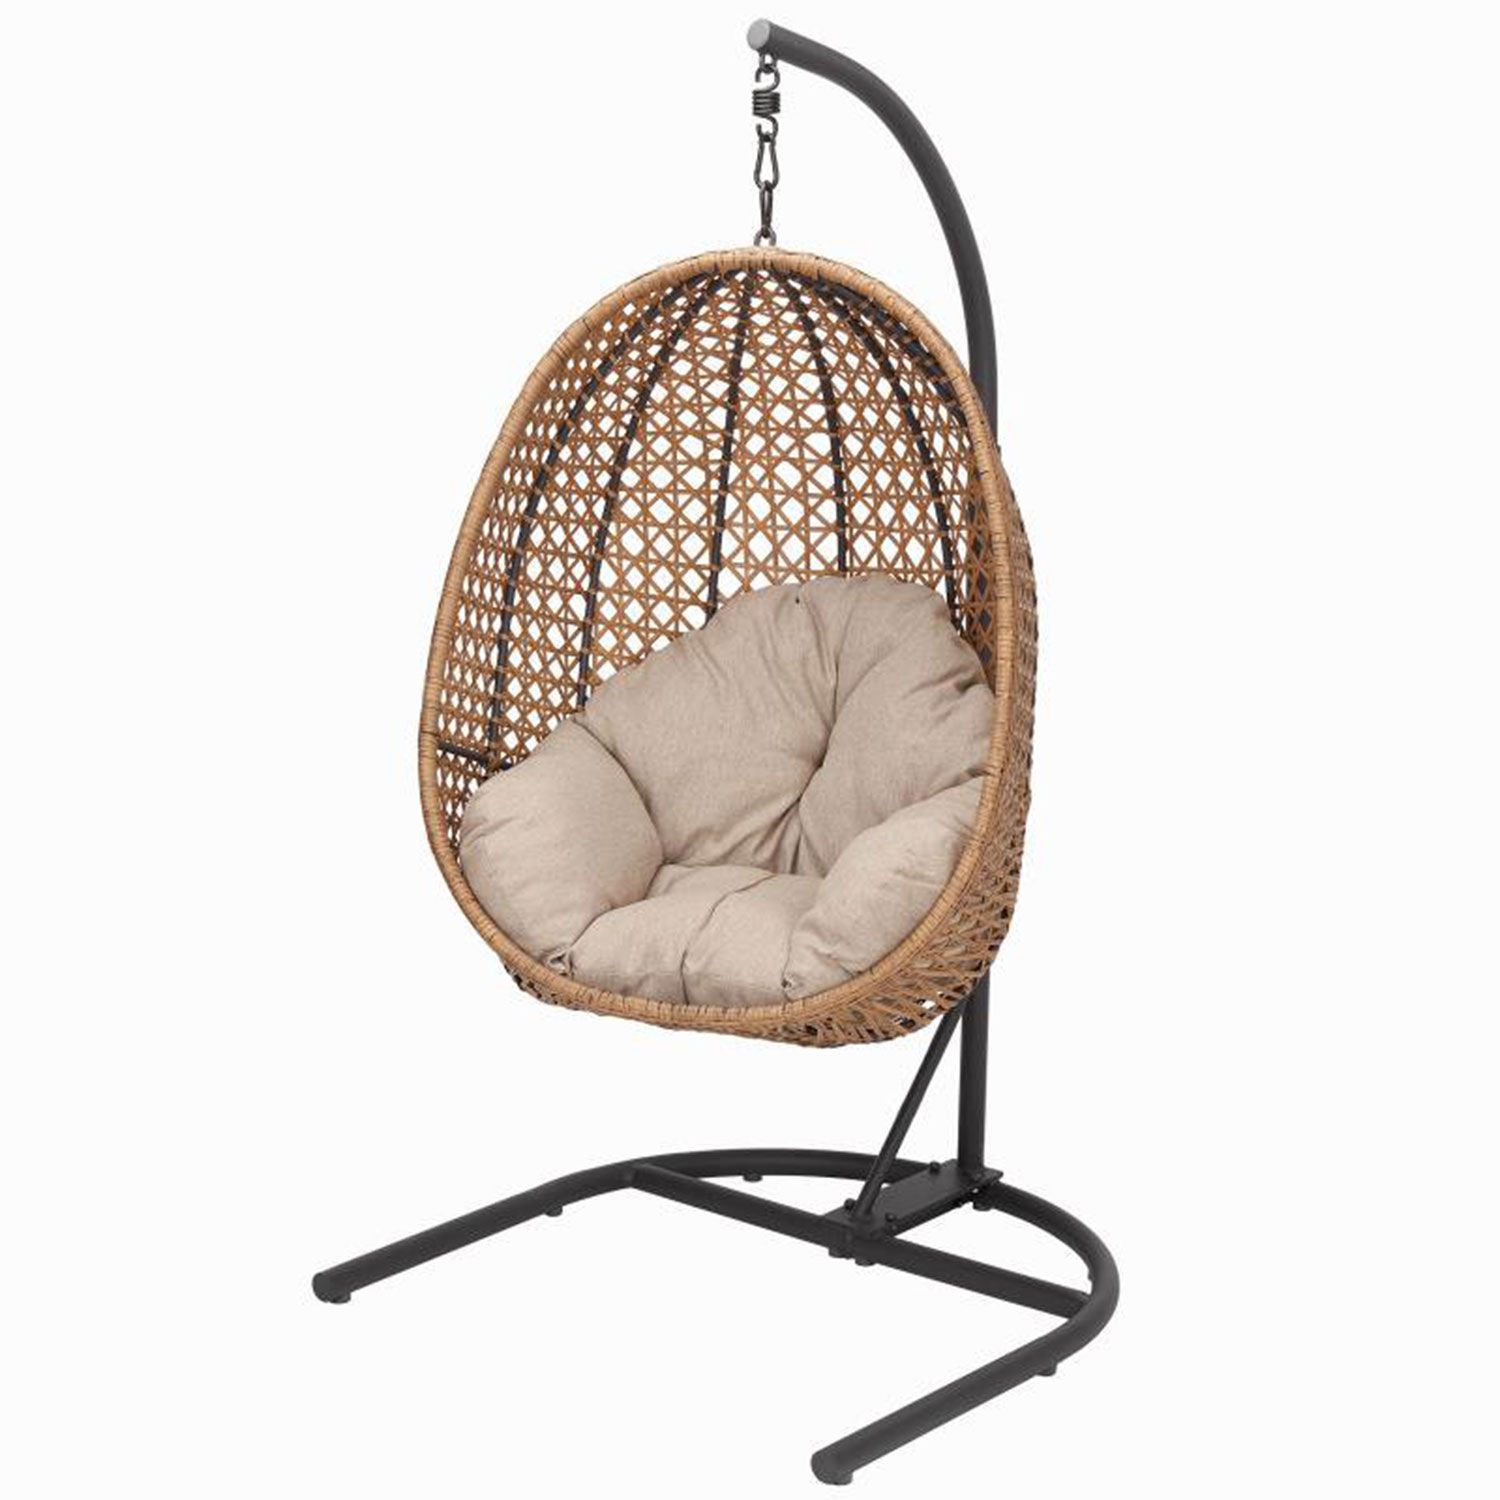 Better Homes & Gardens Lantis Patio Wicker Hanging Chair with Stand and Beige Cushion